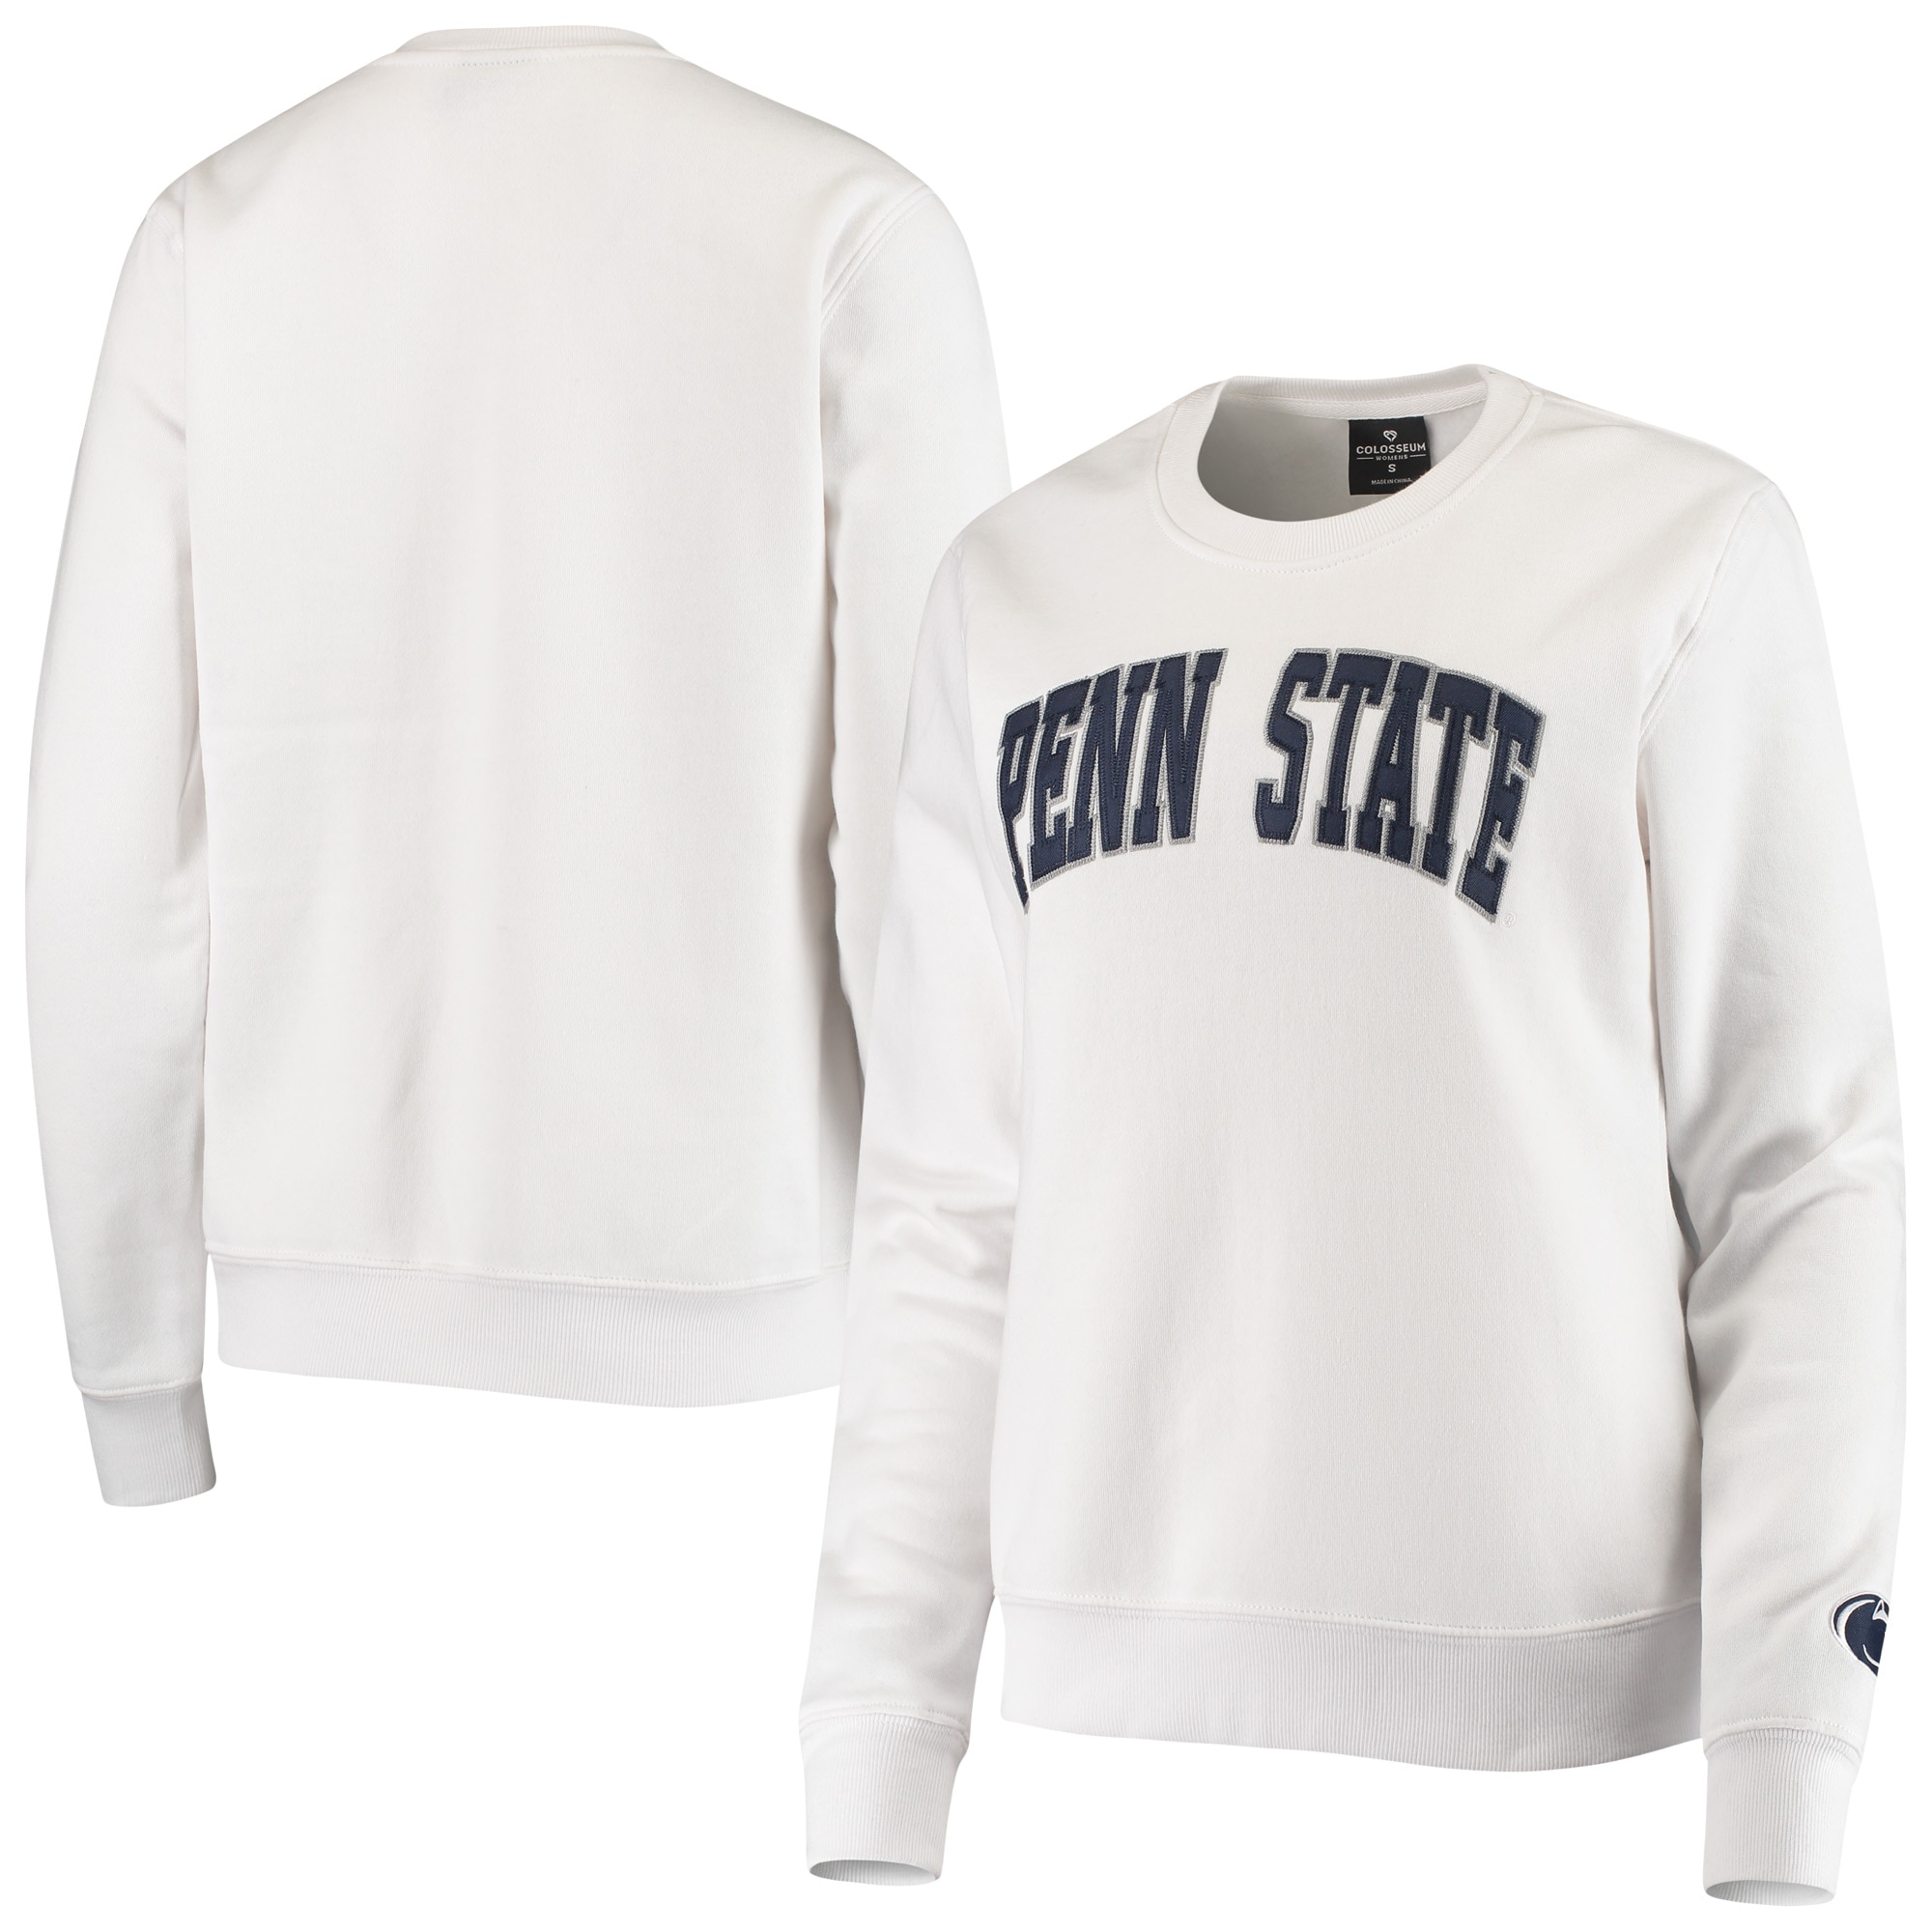 Women's Colosseum White Penn State Nittany Lions Campanile Pullover Sweatshirt - image 1 of 3